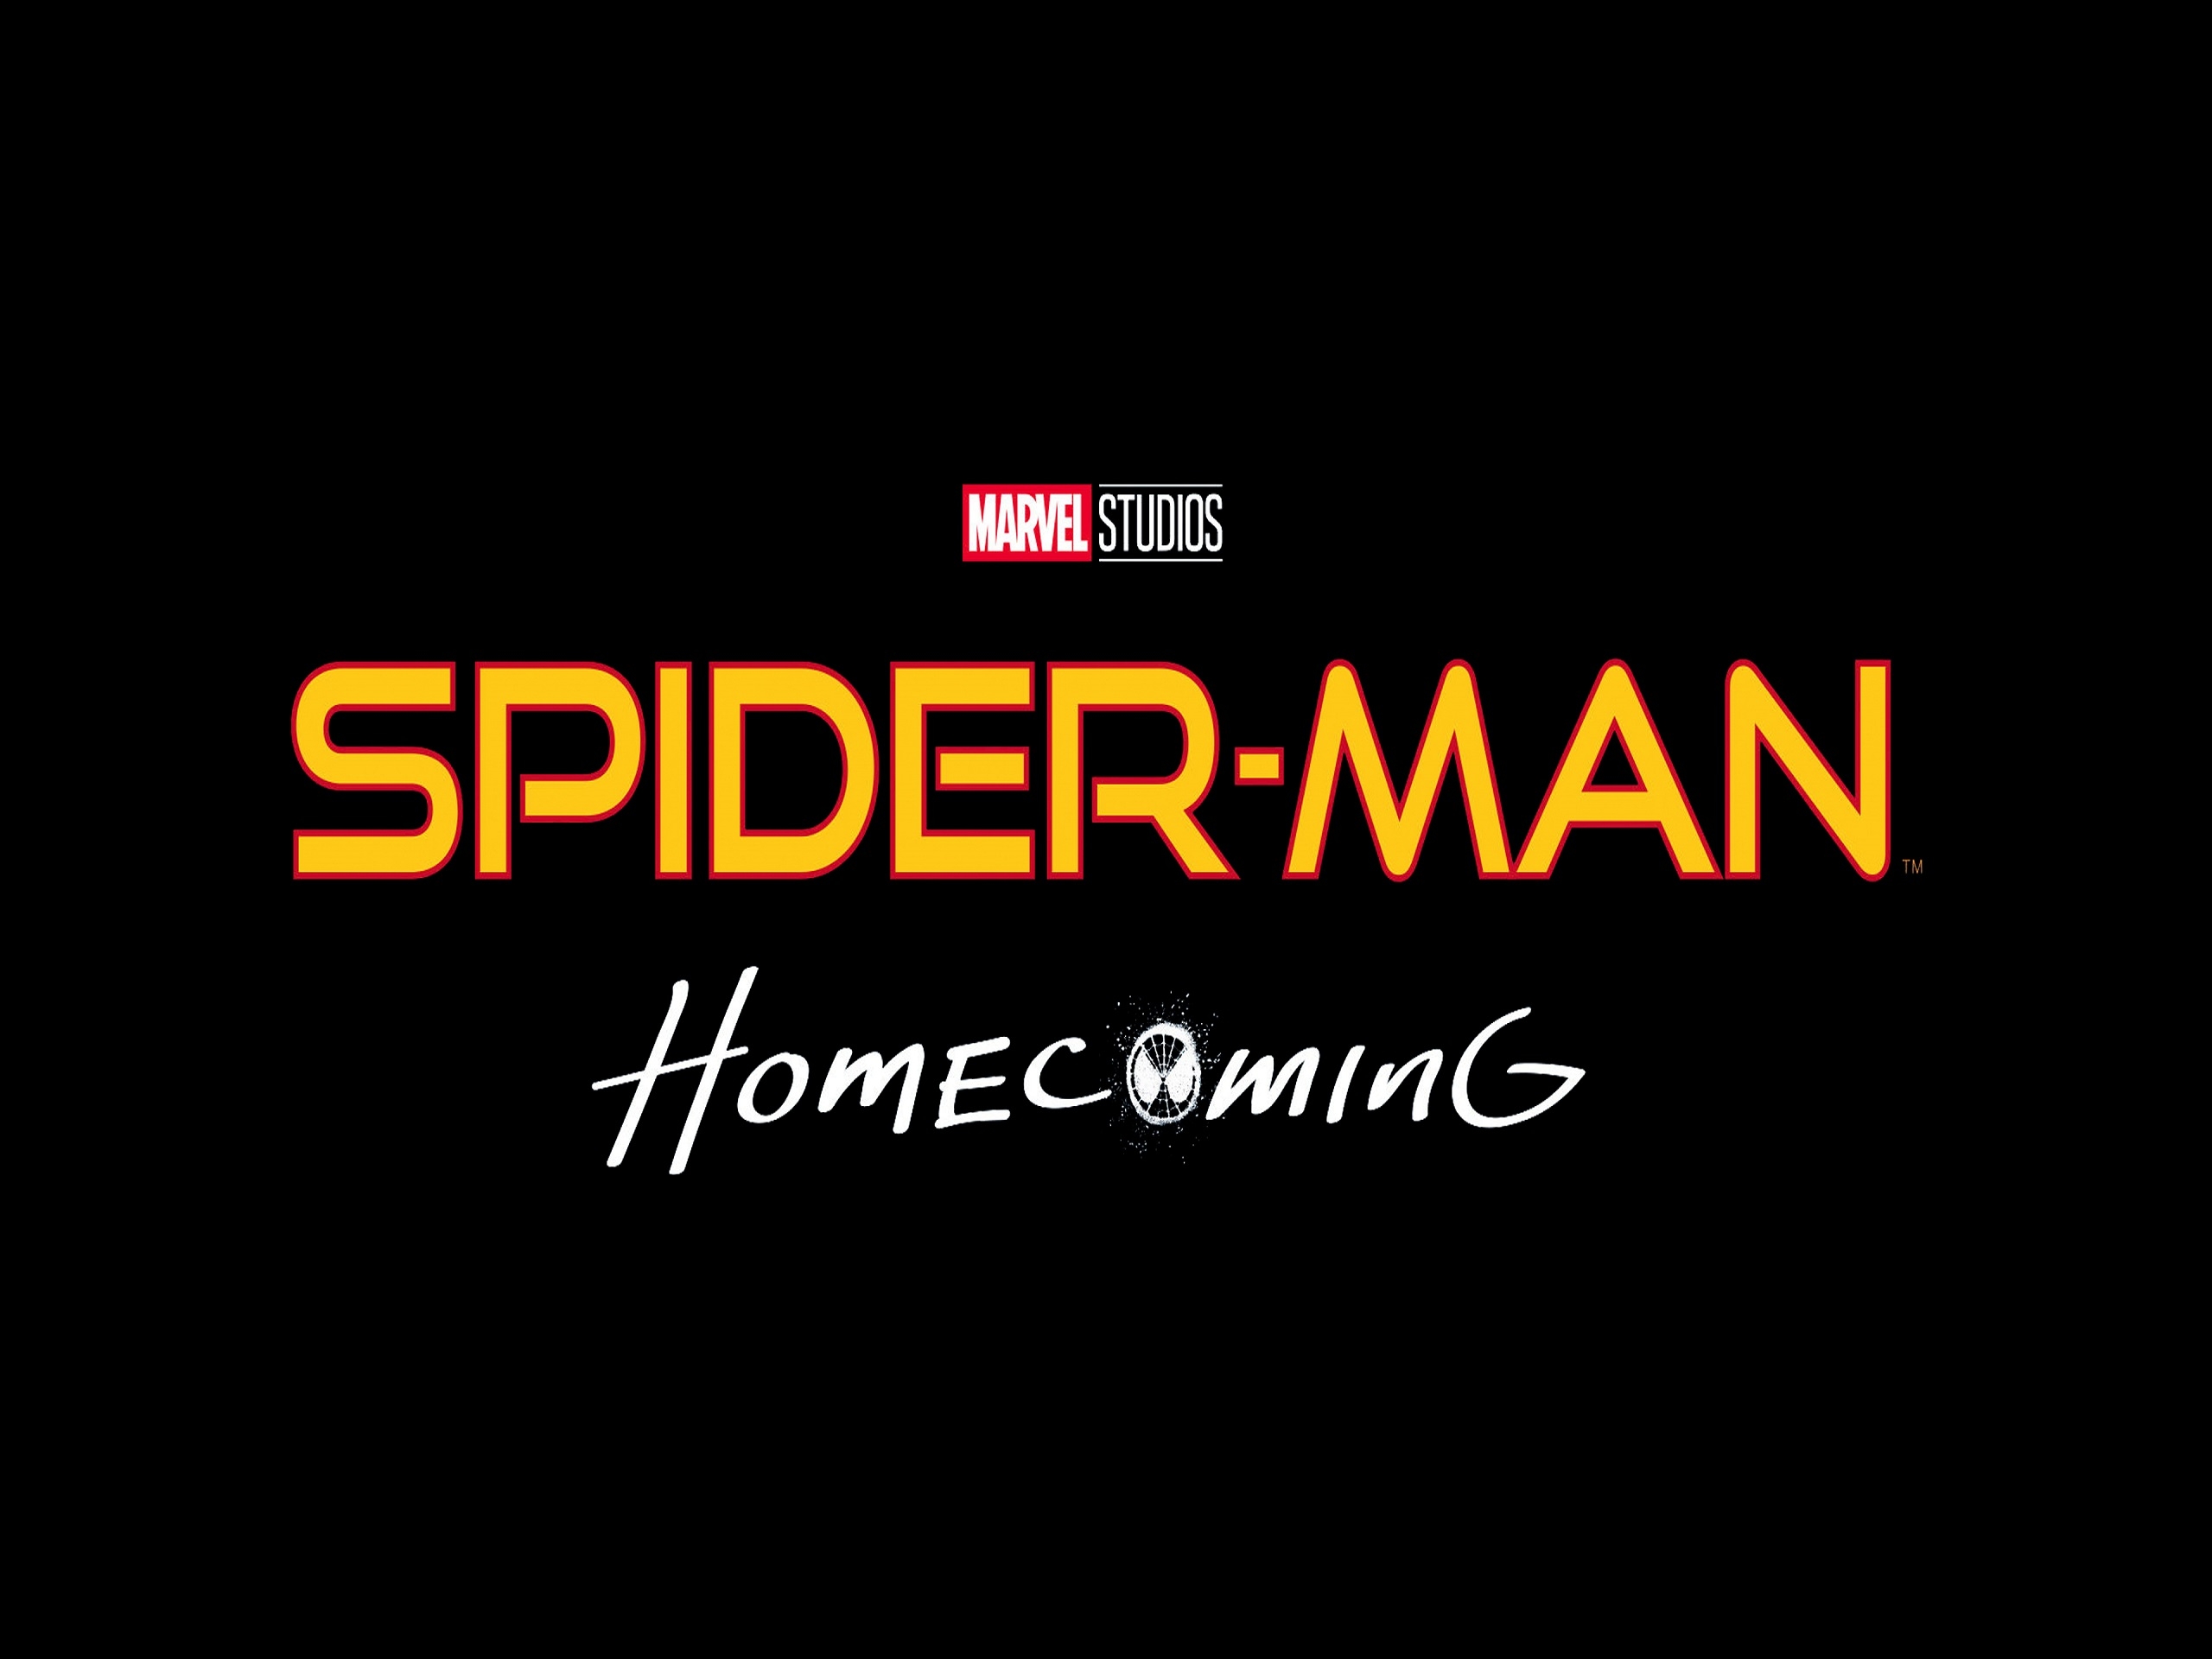 Spiderman Homecoming 2017 for 2560 x 1920 resolution